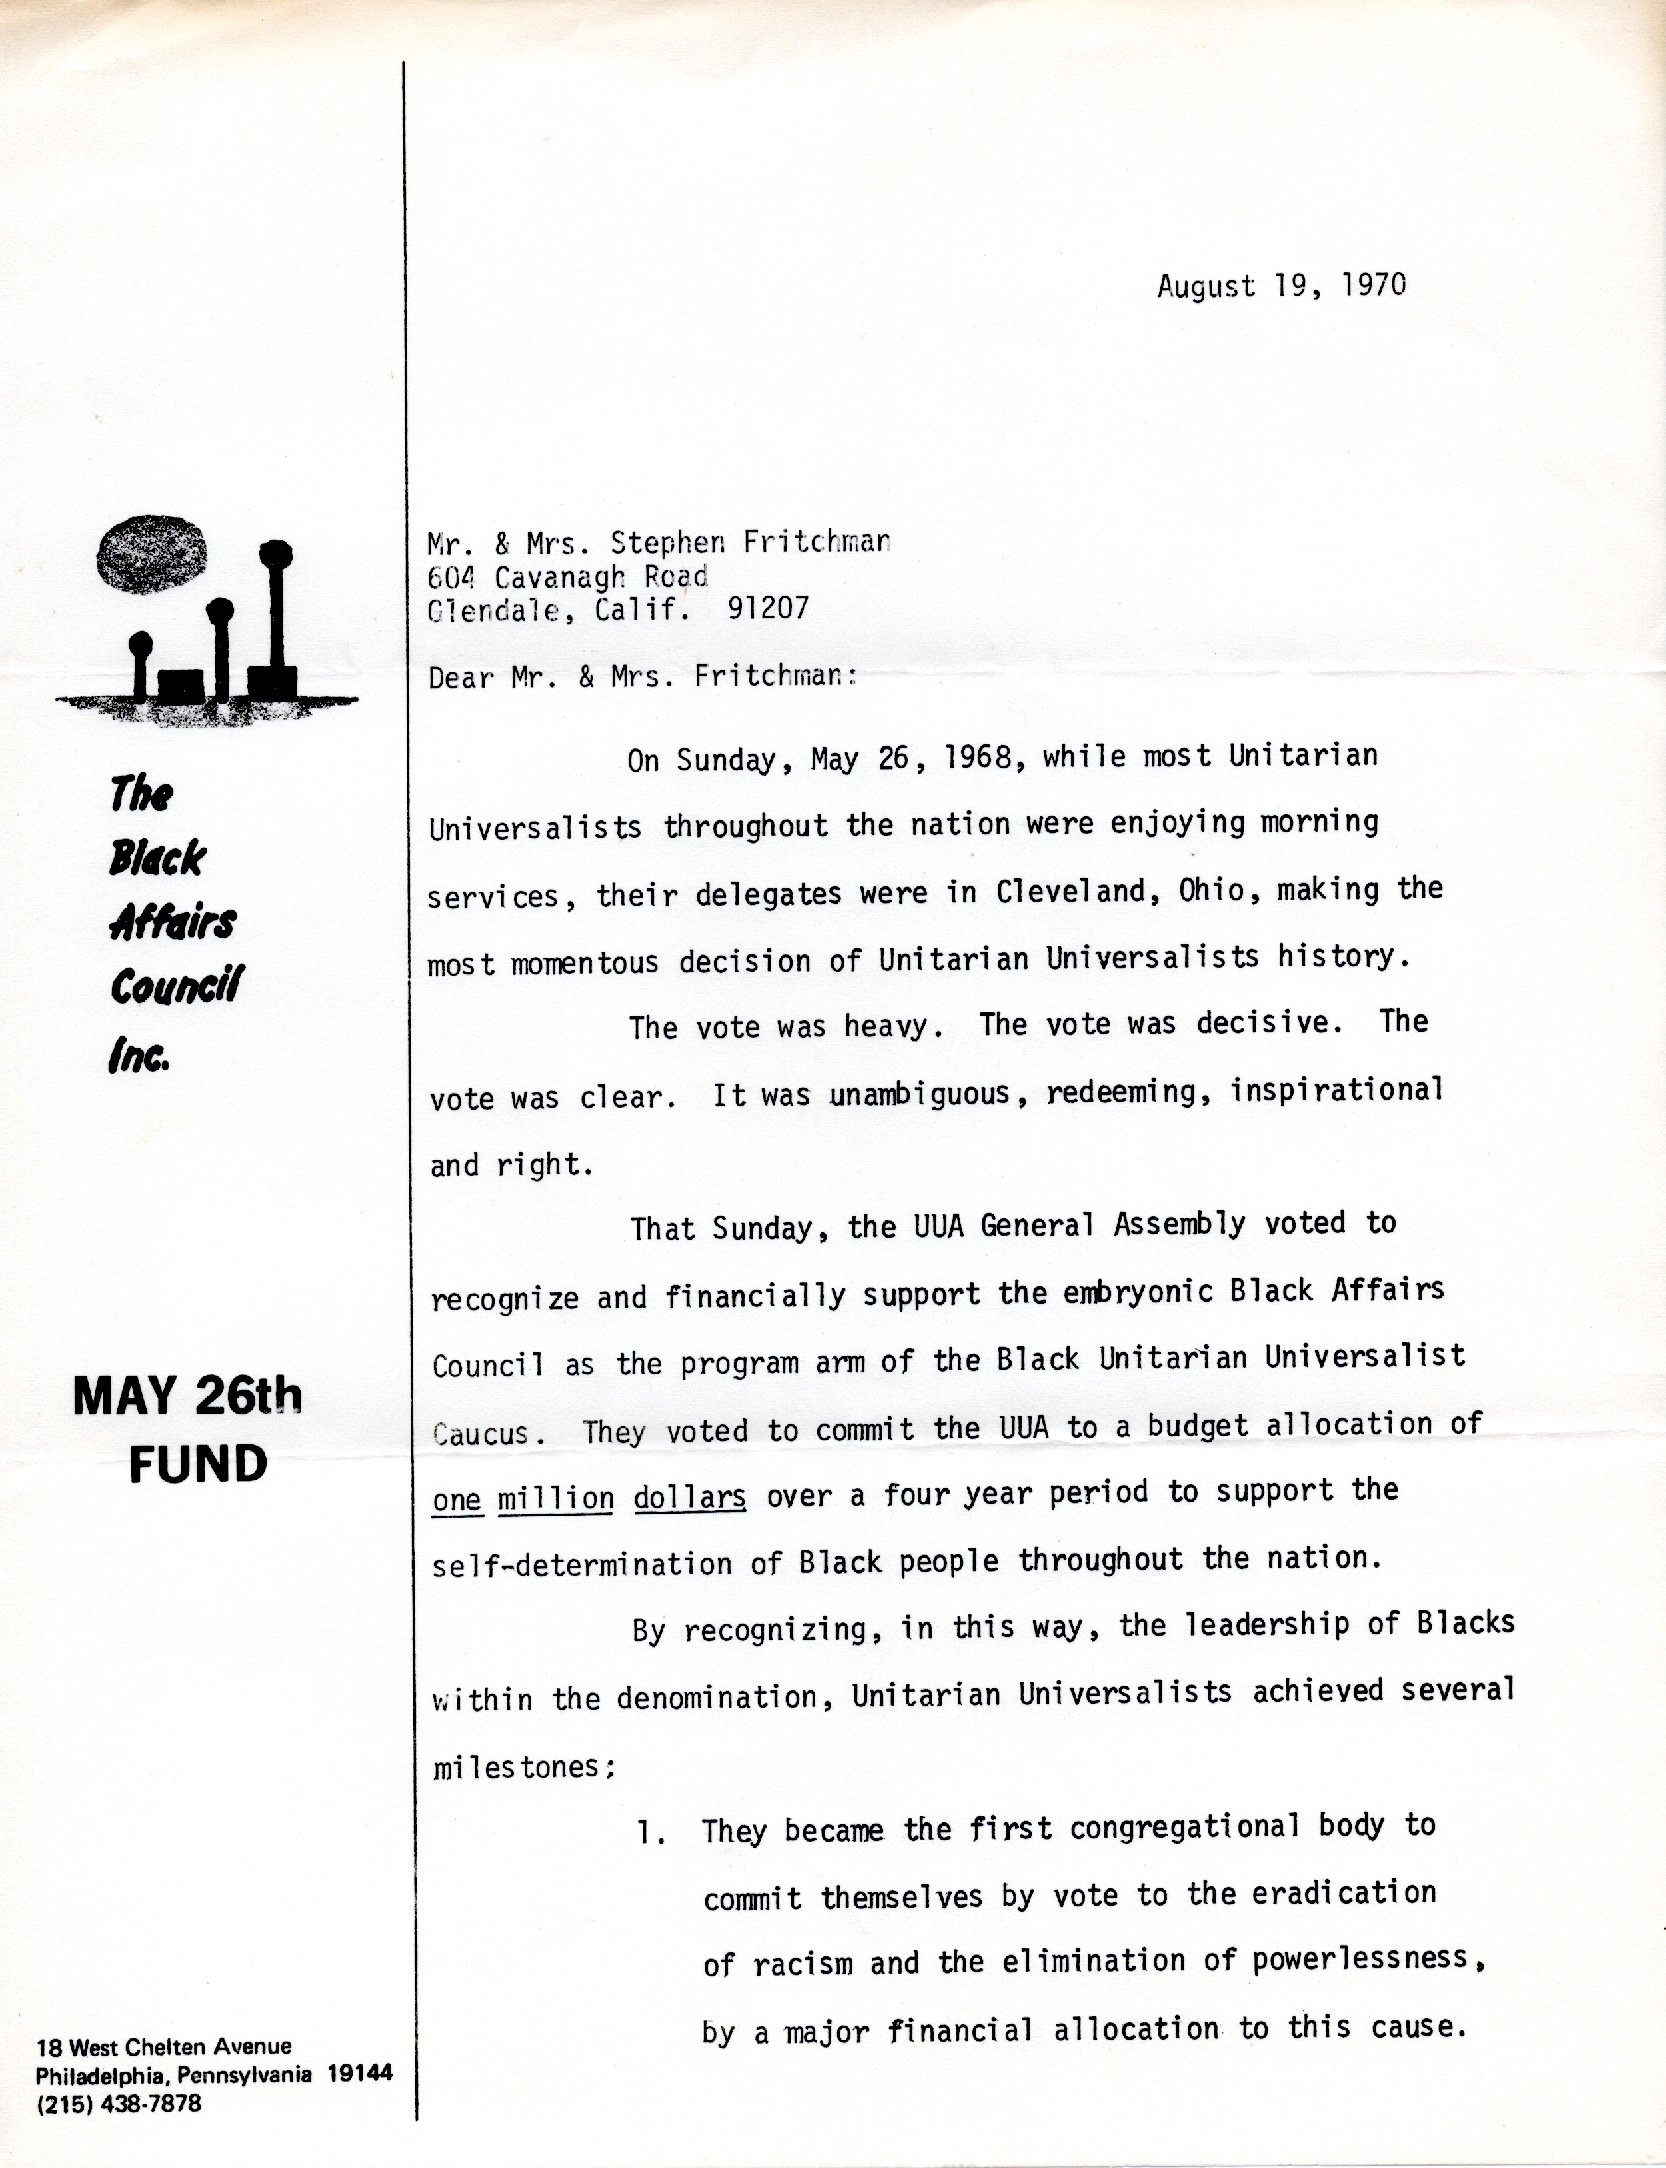 1970.8.19 Letter from Don McKinney to Fritchman re May 26 fund_0001.jpg